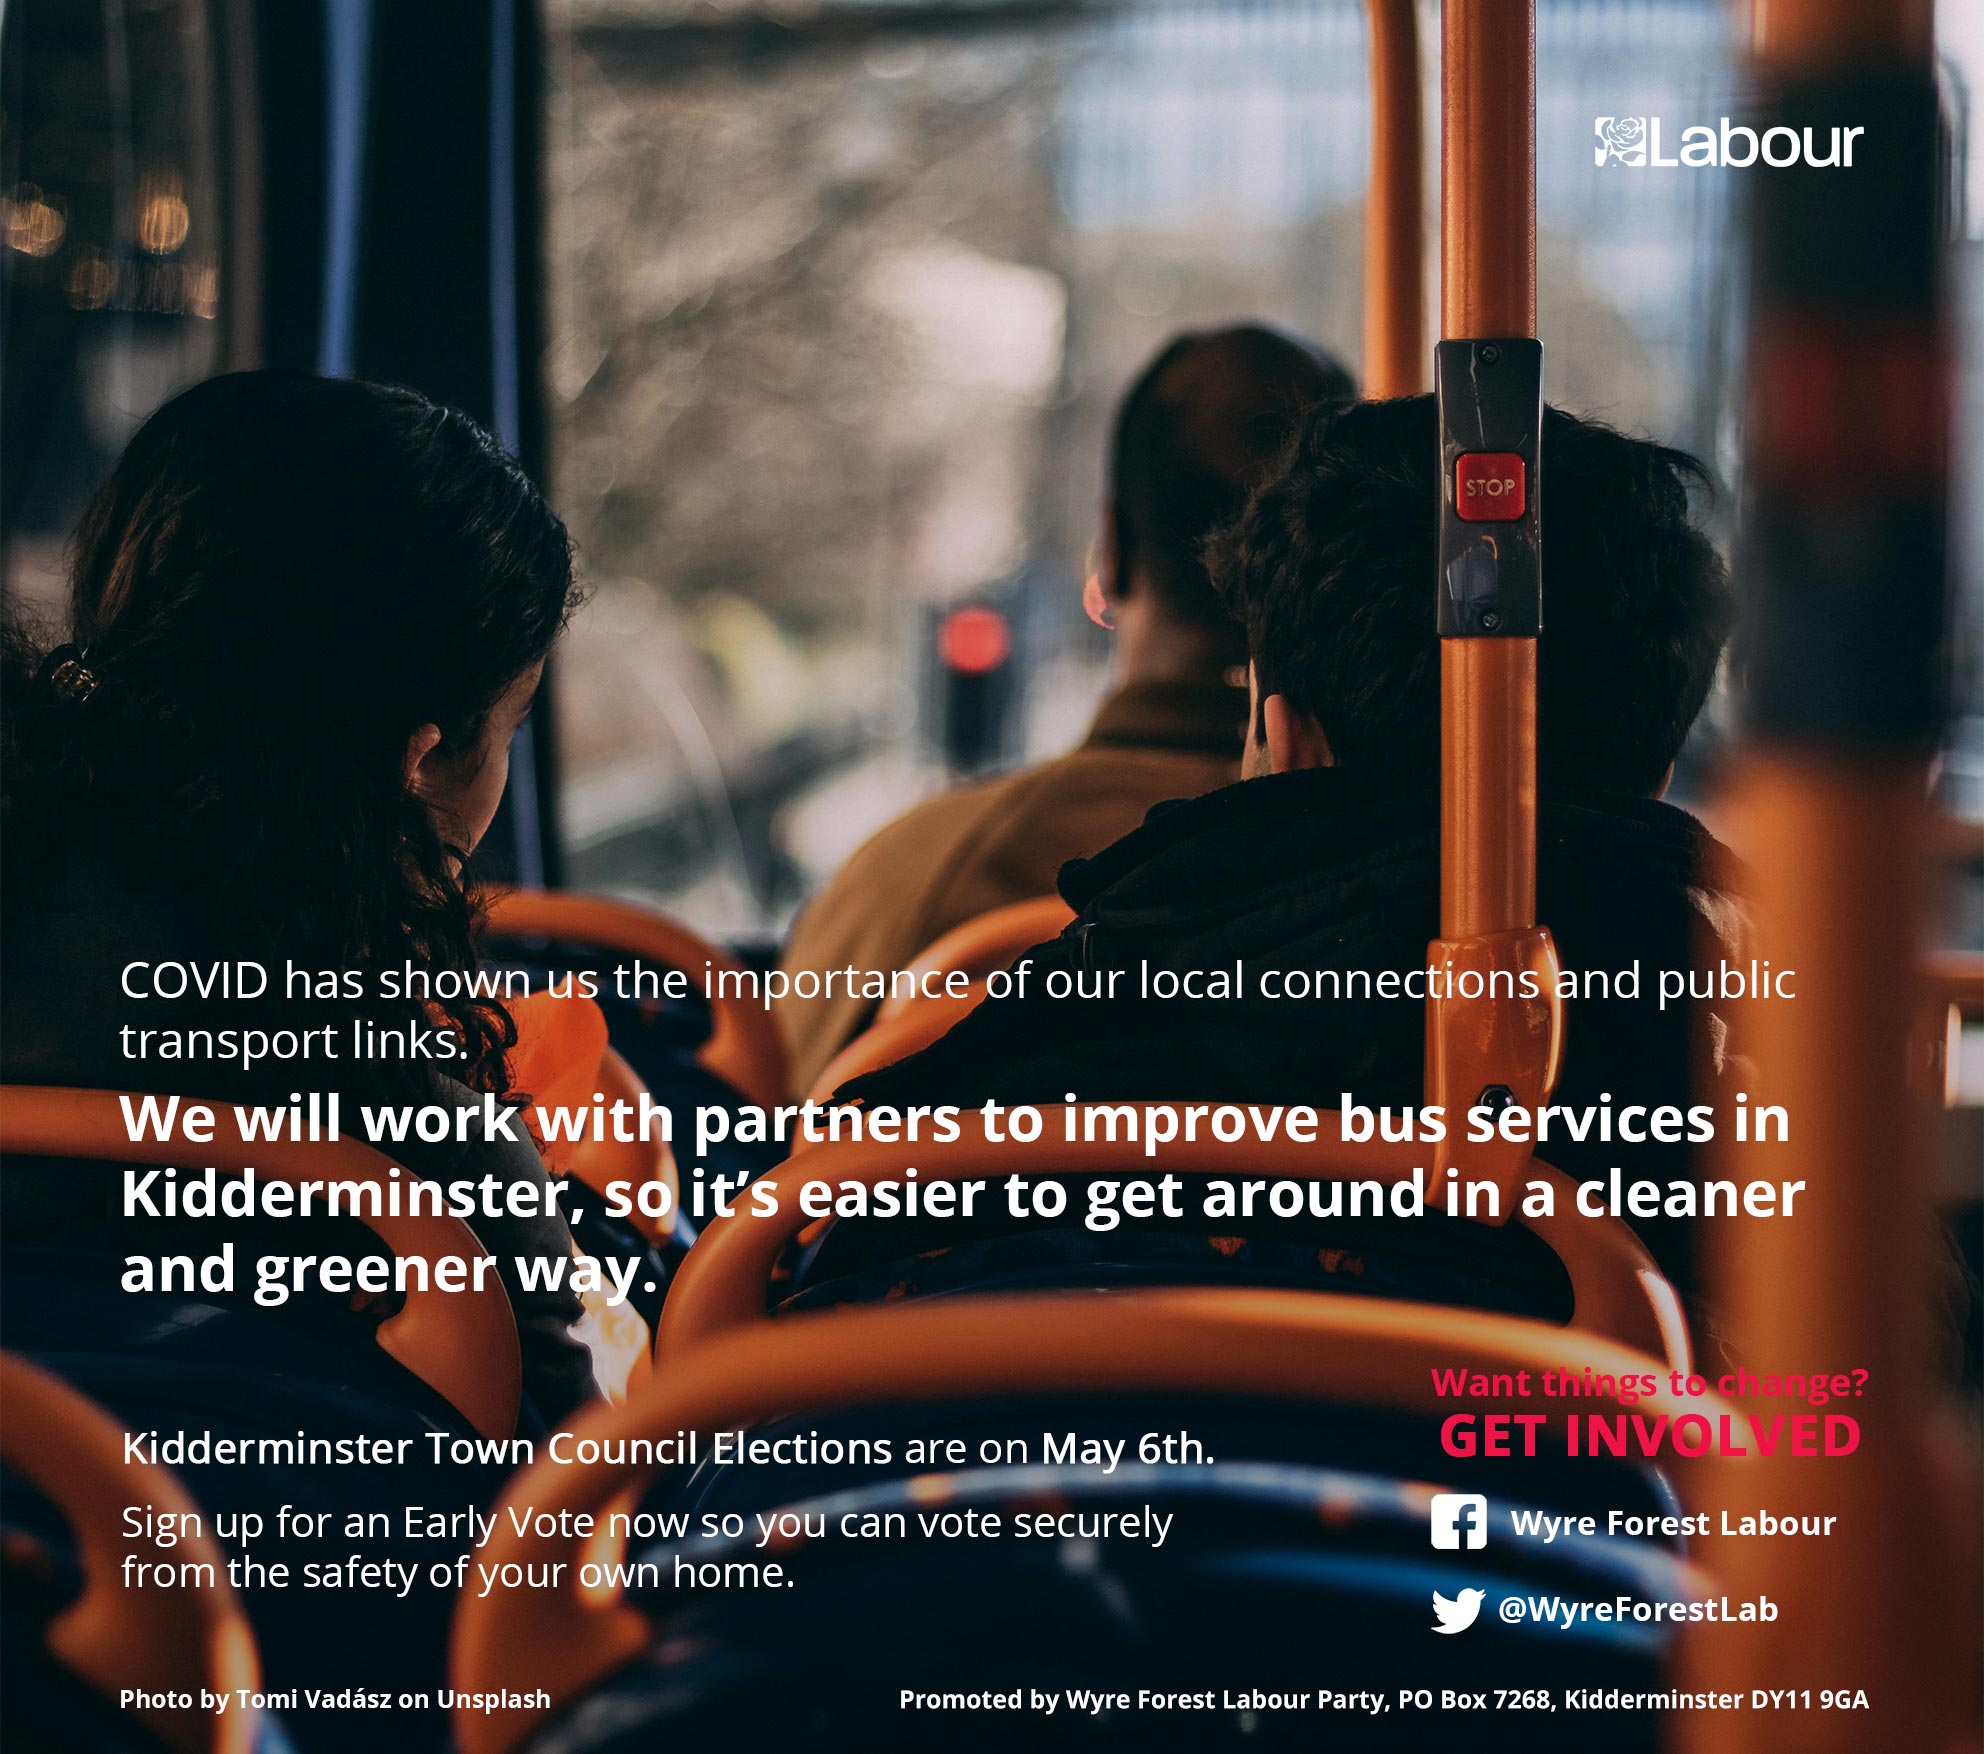 We will work with partners to improve bus services in Kidderminster, so it